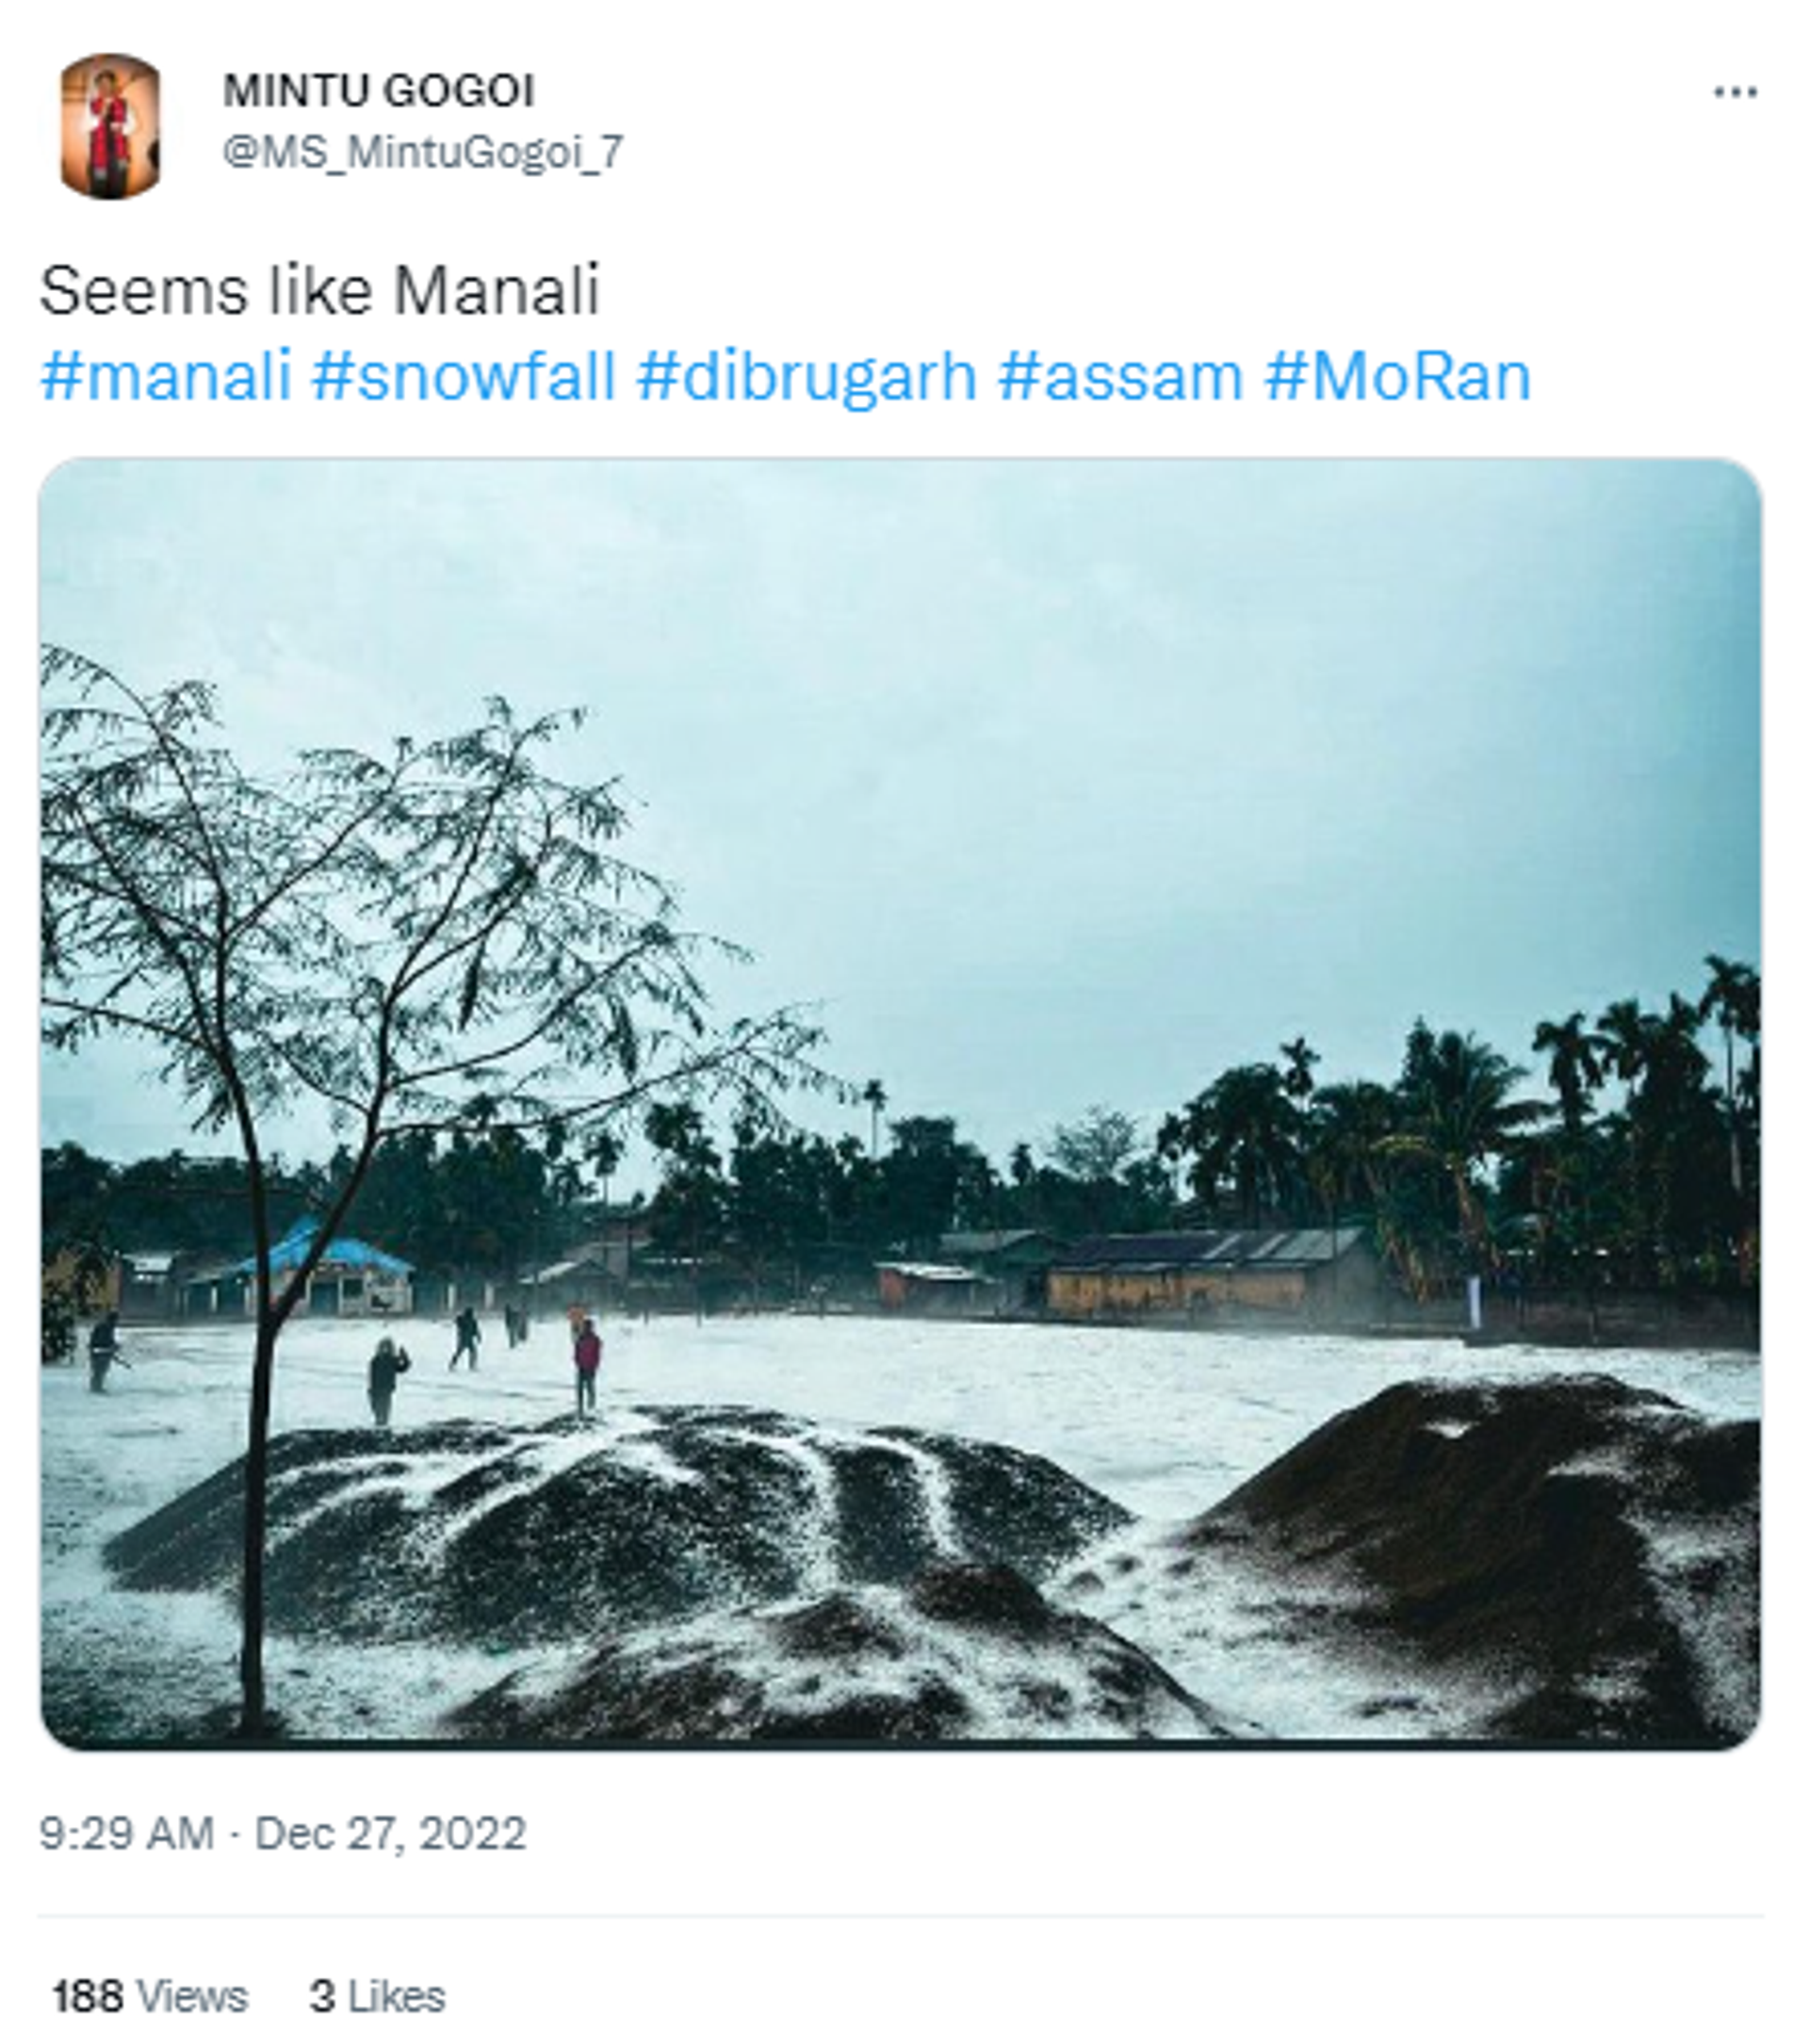 Residents of Moran town and Dibrugarh city in India's Assam state step out to play in snow after hailstorm - Sputnik India, 1920, 27.12.2022